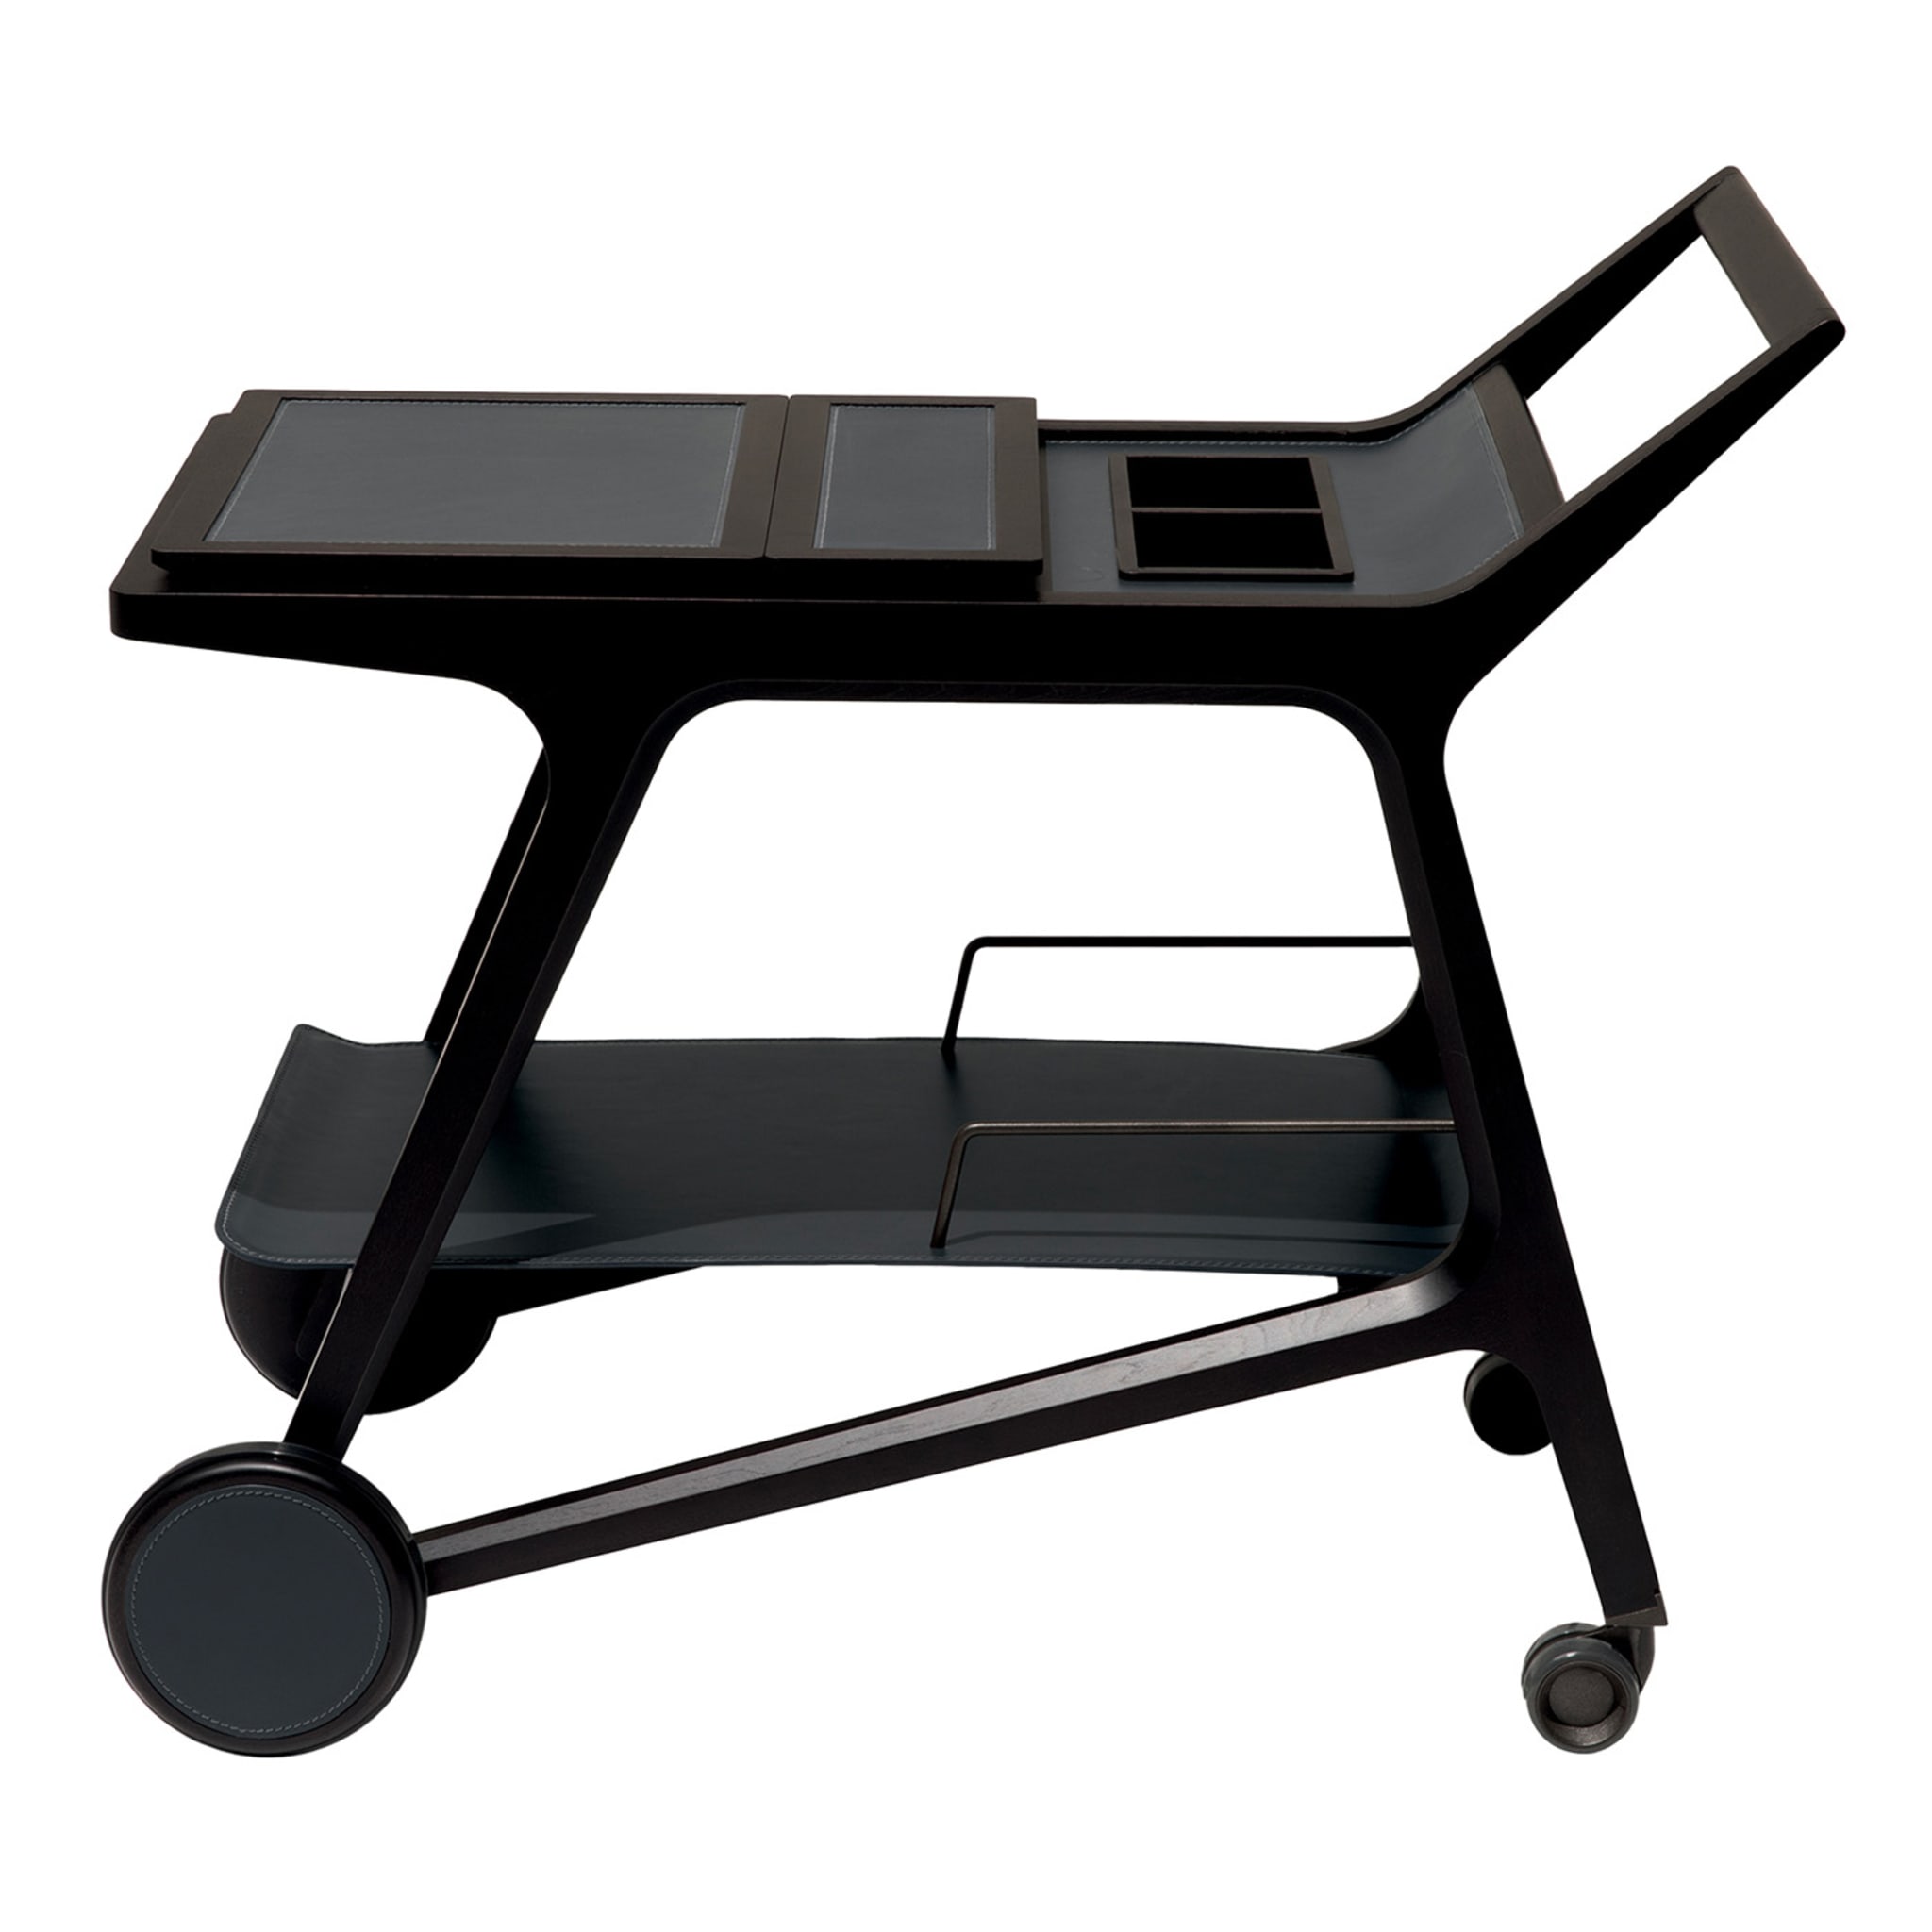 Too Serving Cart - Main view